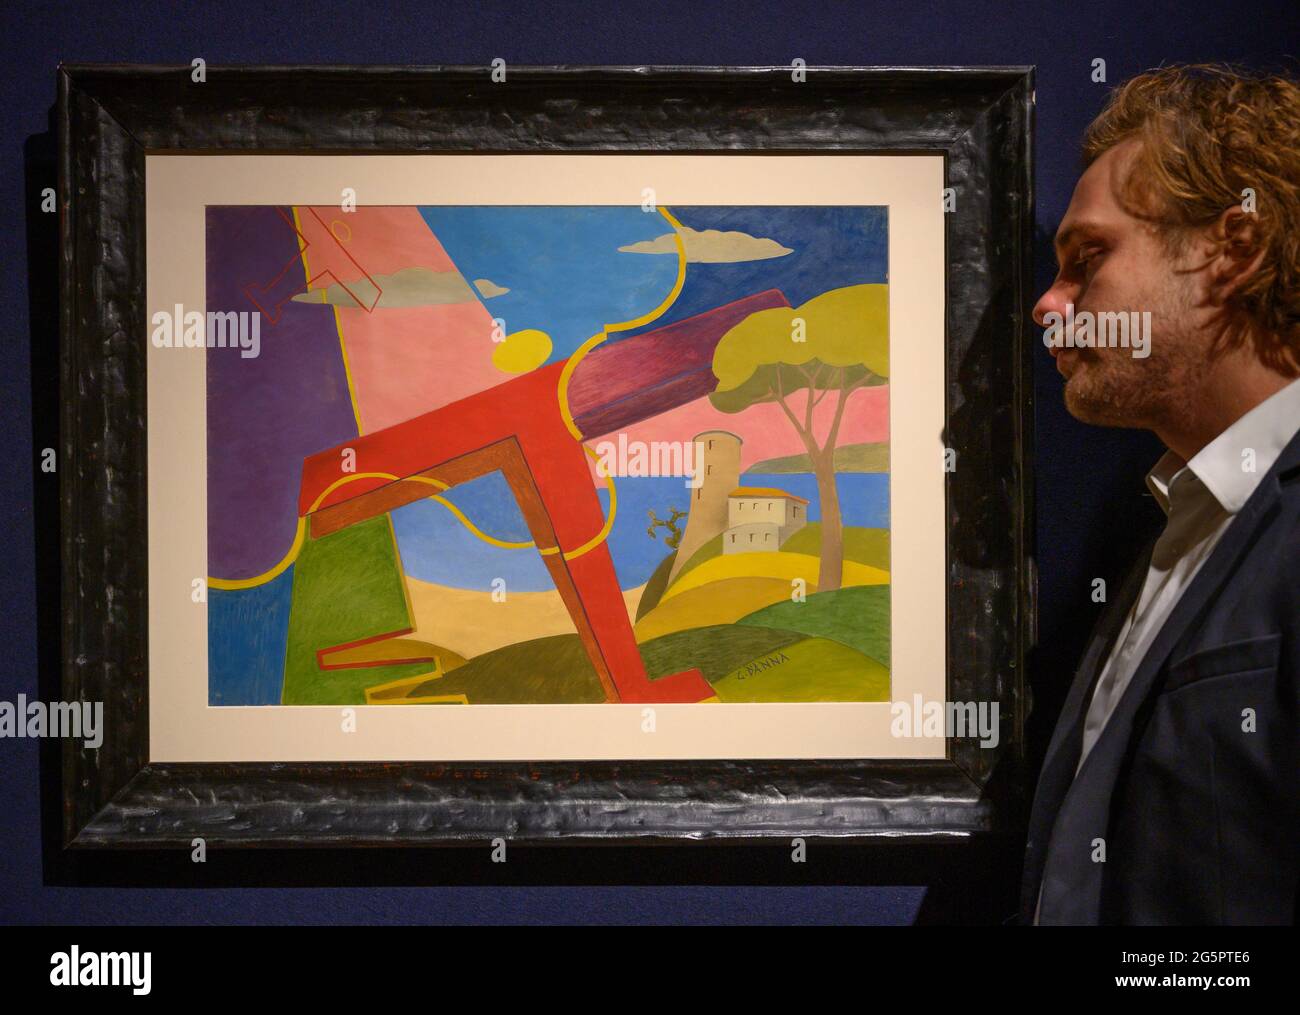 Bonhams, London, UK. 29 June 2021. Preview of works from the current sale Aeropittura, Italian Futurism in Flight sale at Bonhams, ending online 1 July 2021. Image: GIULIO D'ANNA (1908-1978). Paesaggio simultaneo + aerei Caproni. Ending from: 1 Jul 2021 at 12:08 BST. Estimate: £10,000-15,000. Credit: Malcolm Park/Alamy Live News. Stock Photo